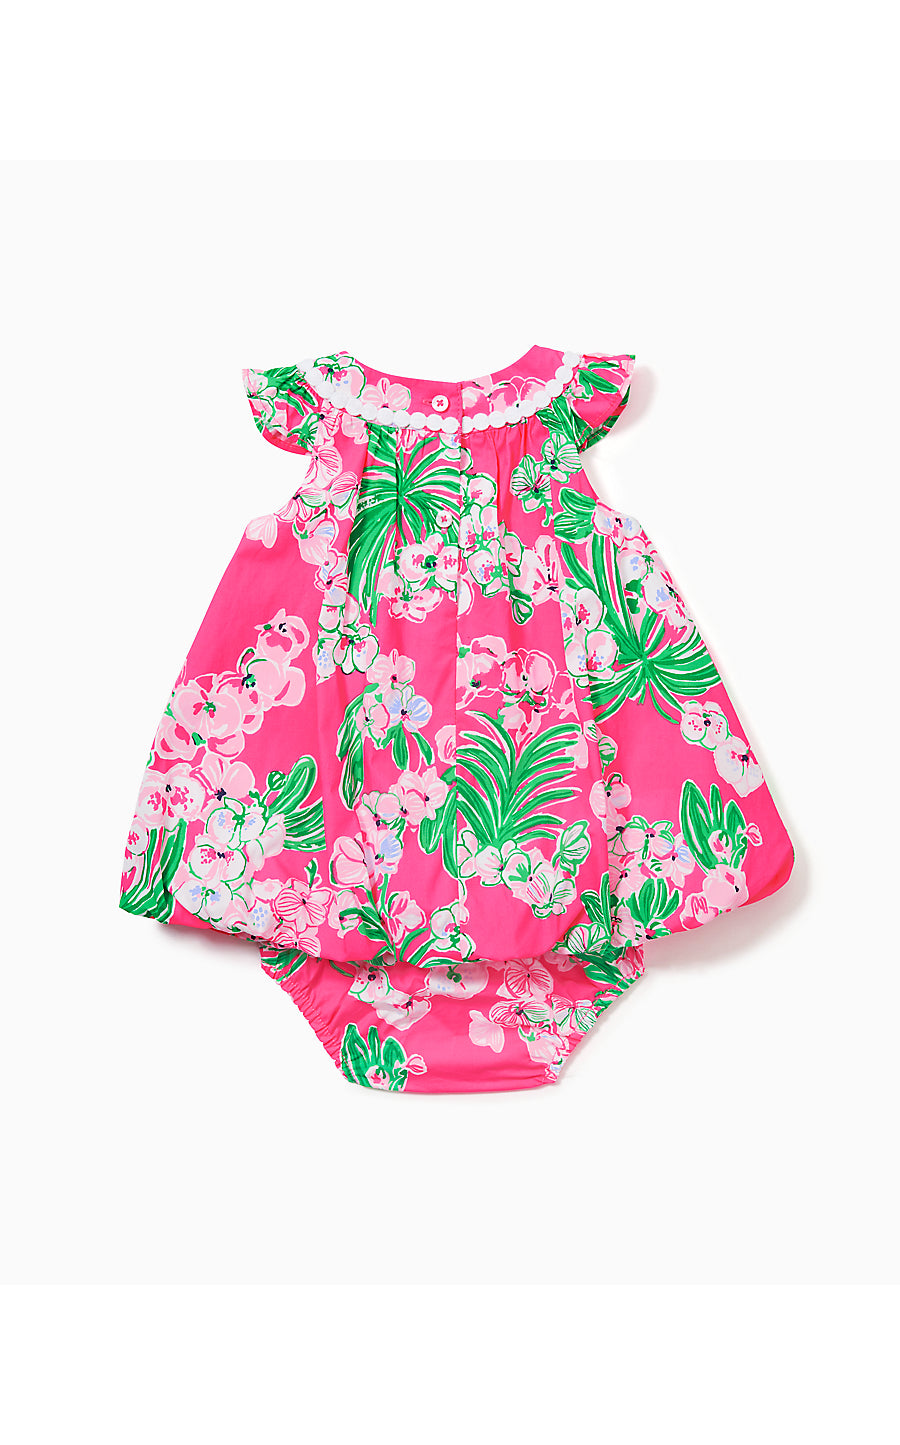 BABY PALOMA BUBBLE DRESS, ROXIE PINK WORTH A LOOK